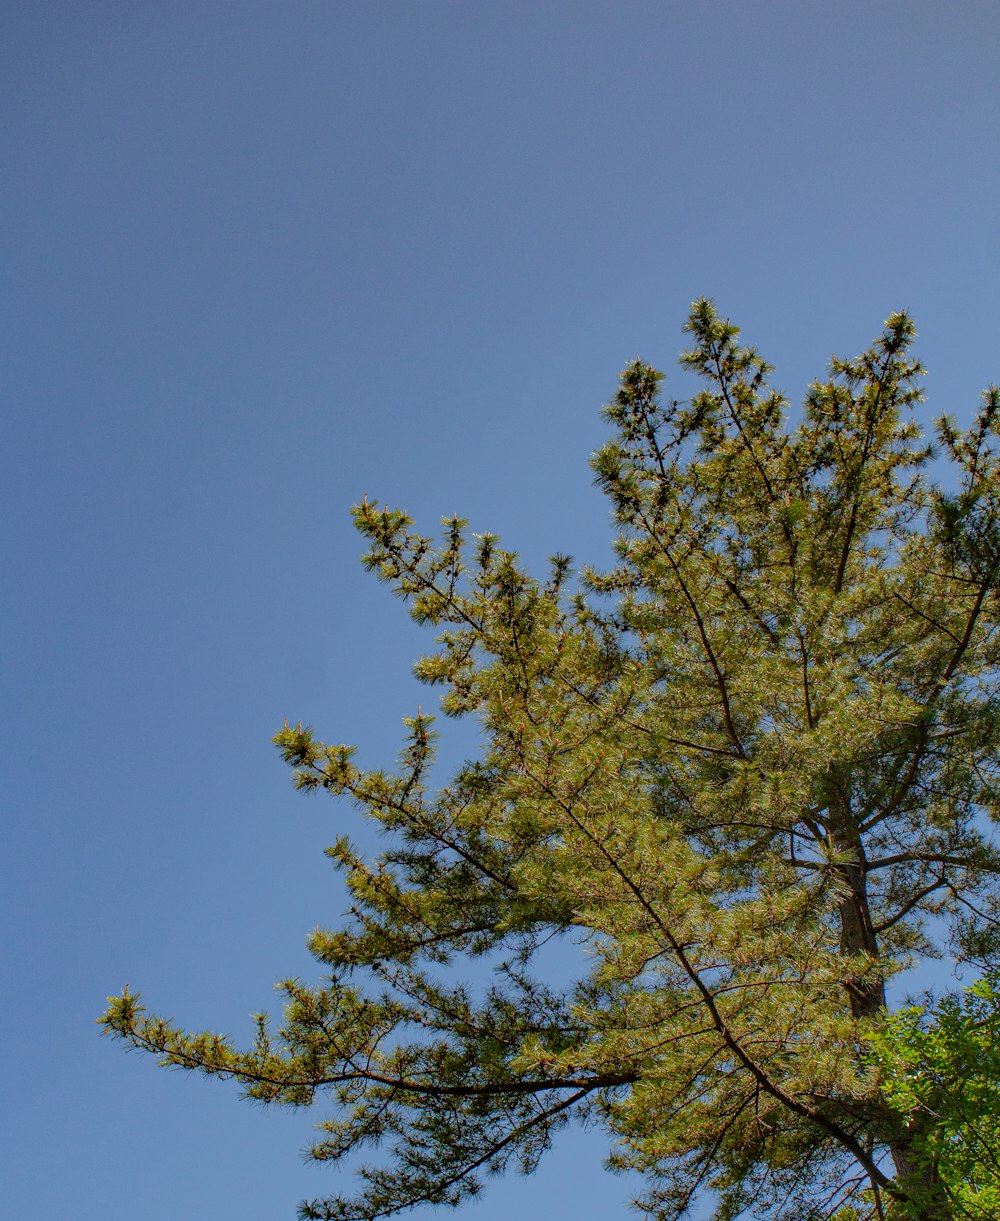 a tall pine tree with a blue sky in the background